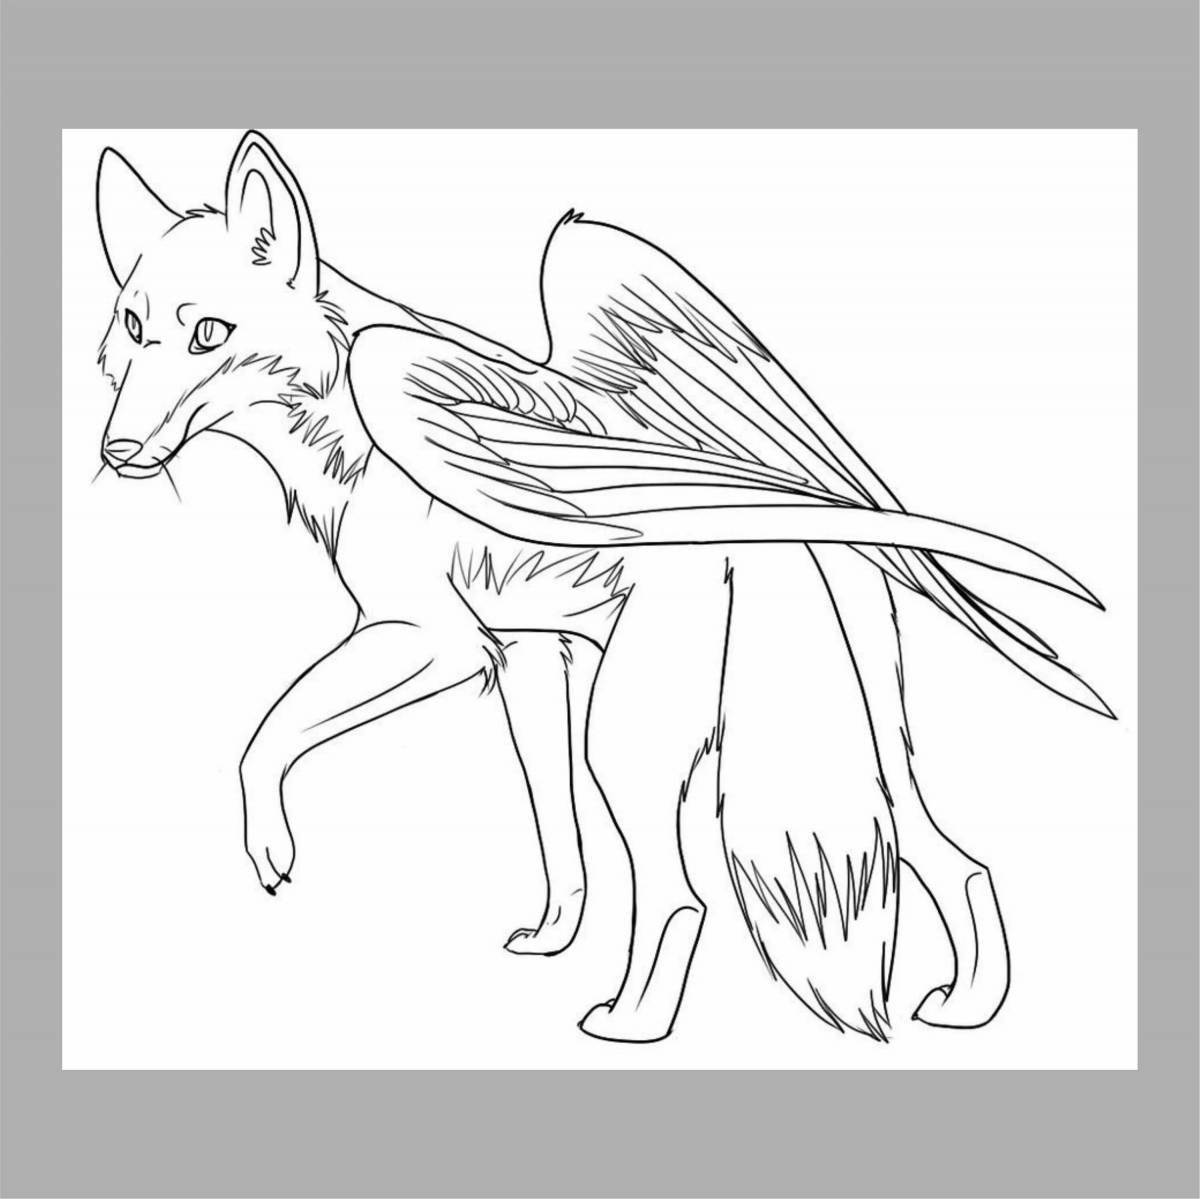 Fox with wings #7